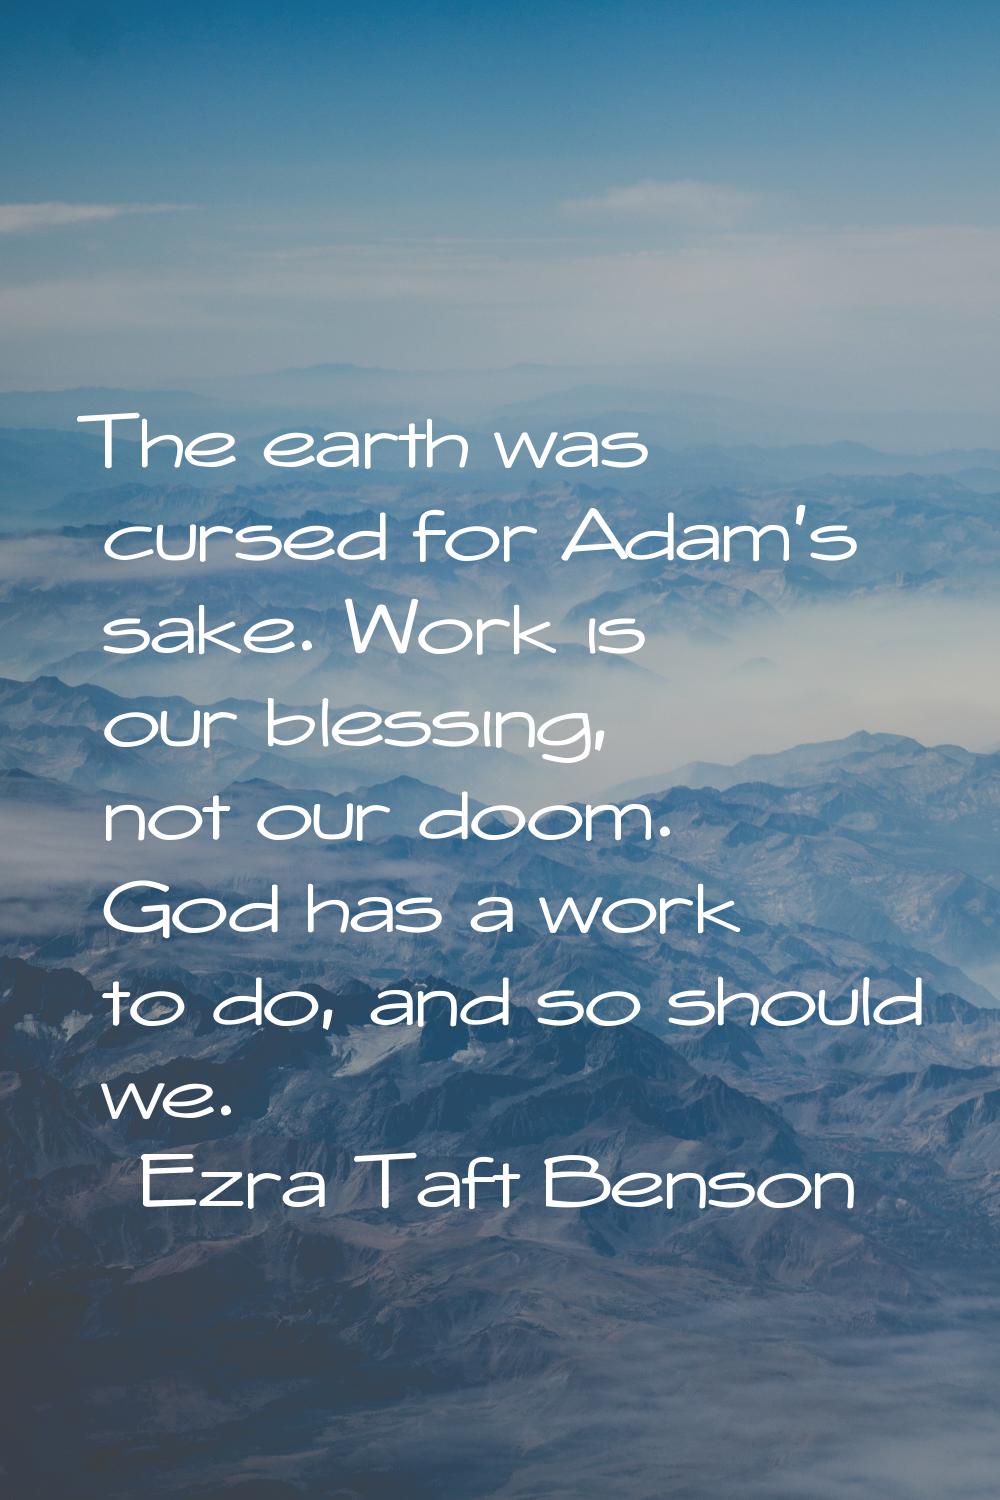 The earth was cursed for Adam's sake. Work is our blessing, not our doom. God has a work to do, and